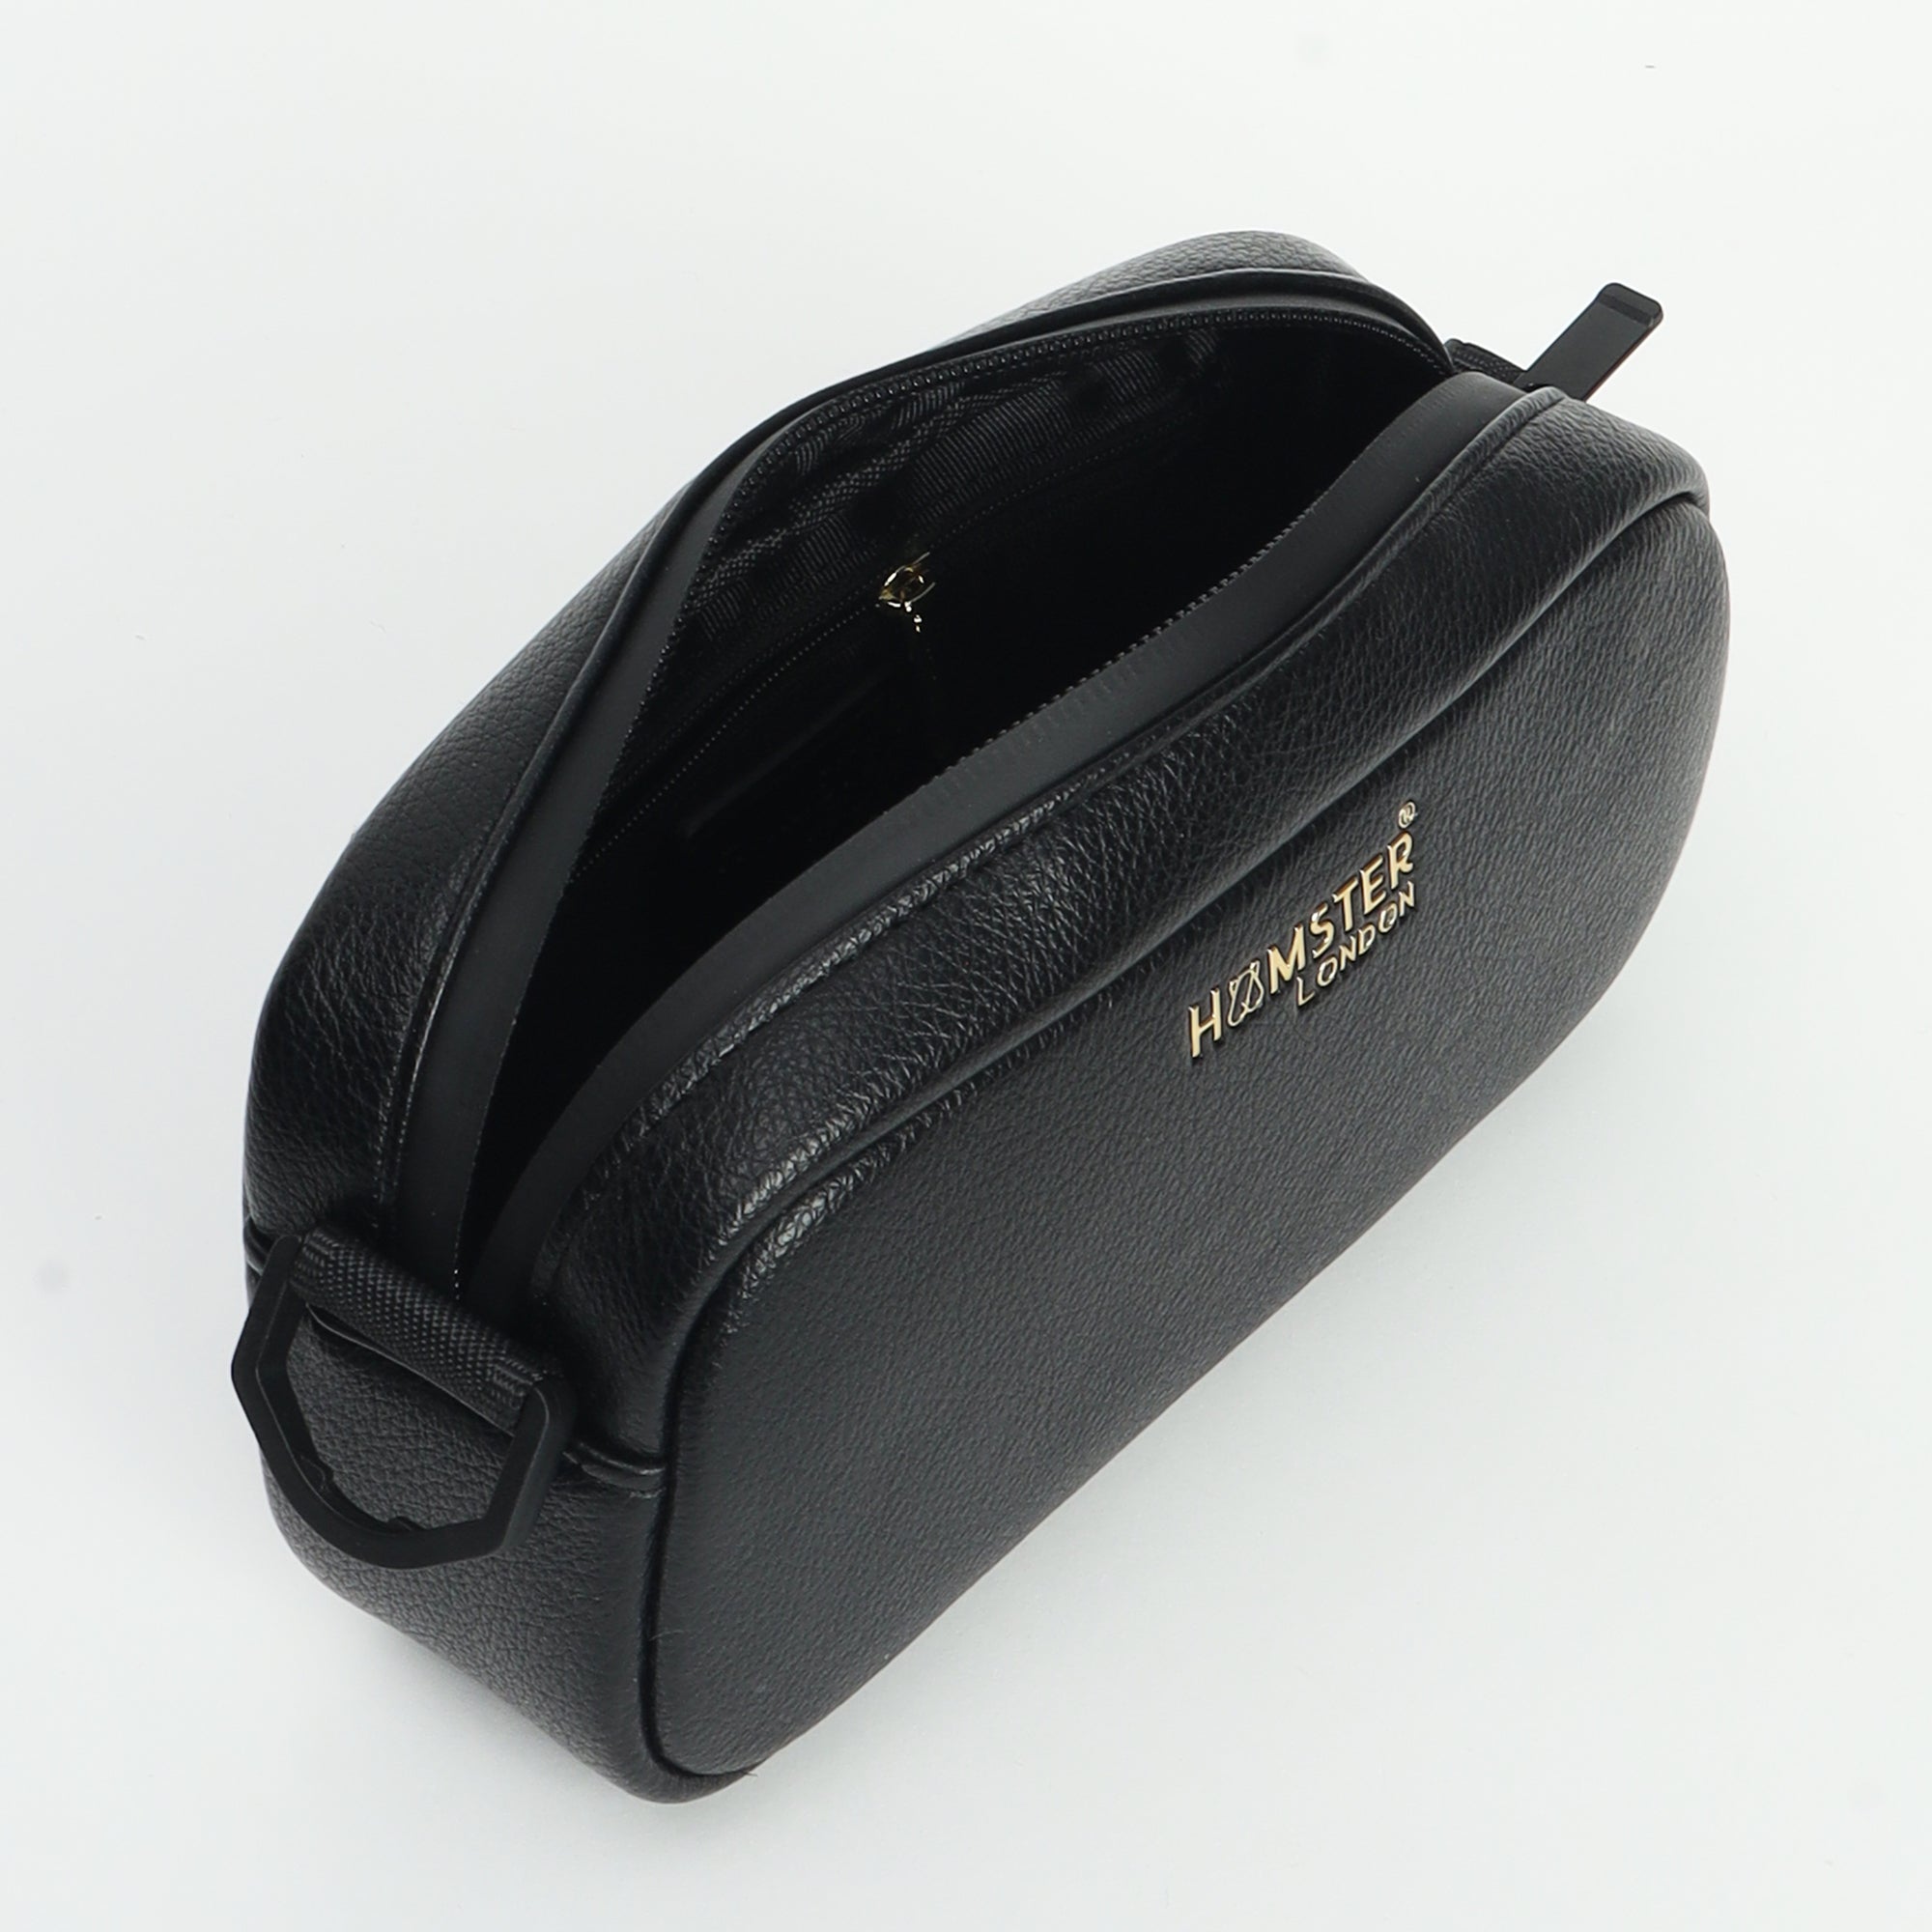 HL Millionaire Picadelly Circus Airport Bag Black